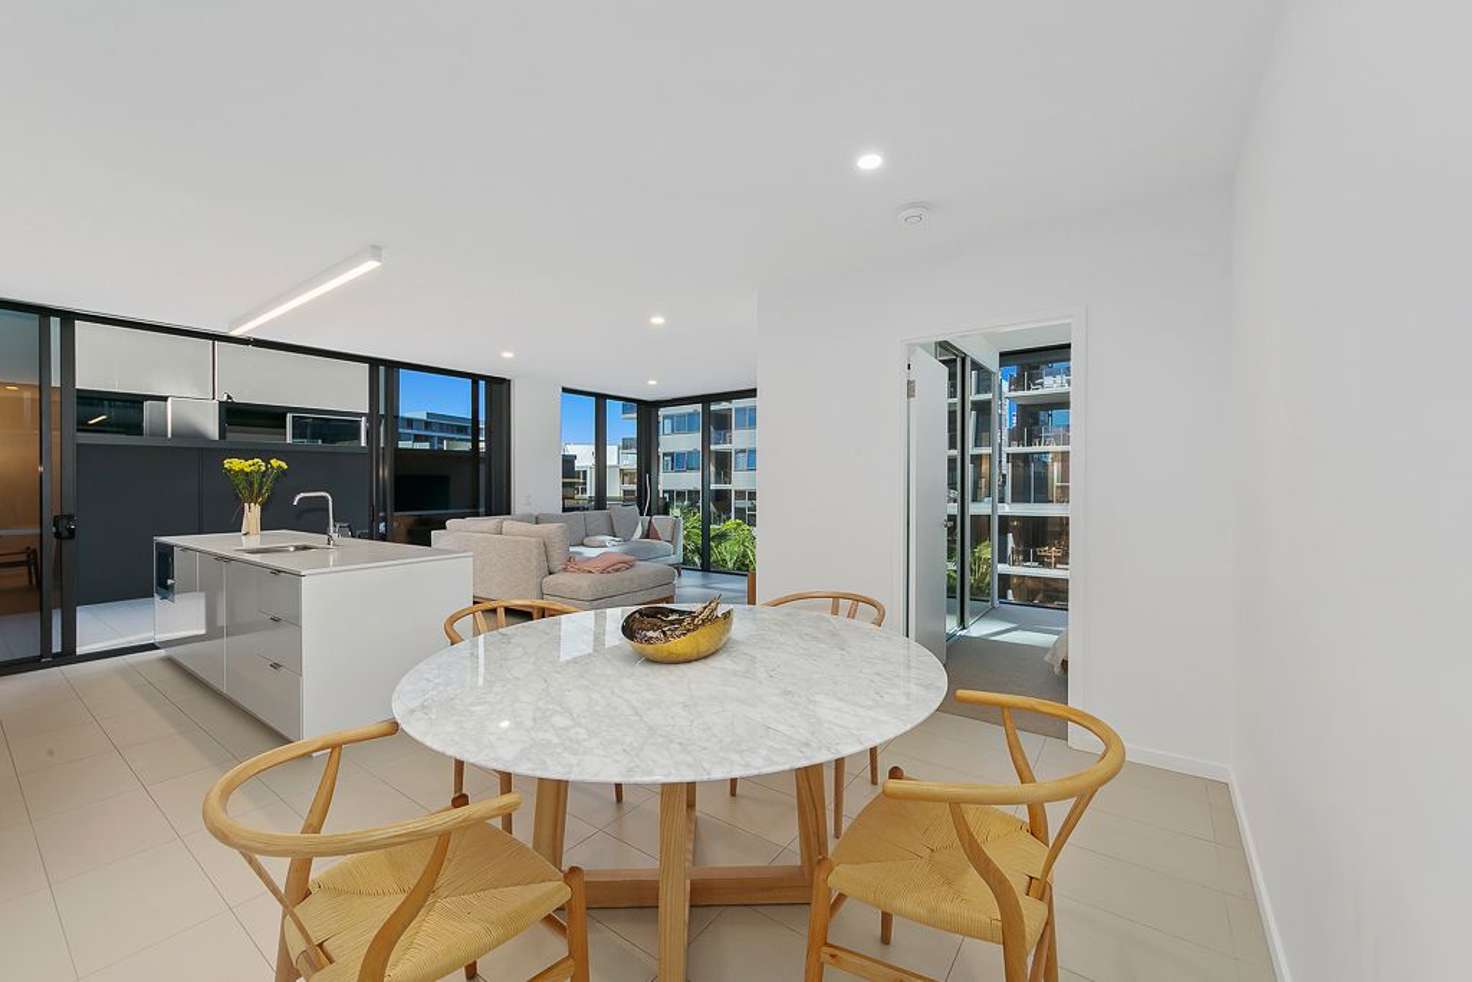 Main view of Homely apartment listing, 4045/36 Evelyn Street, Newstead QLD 4006